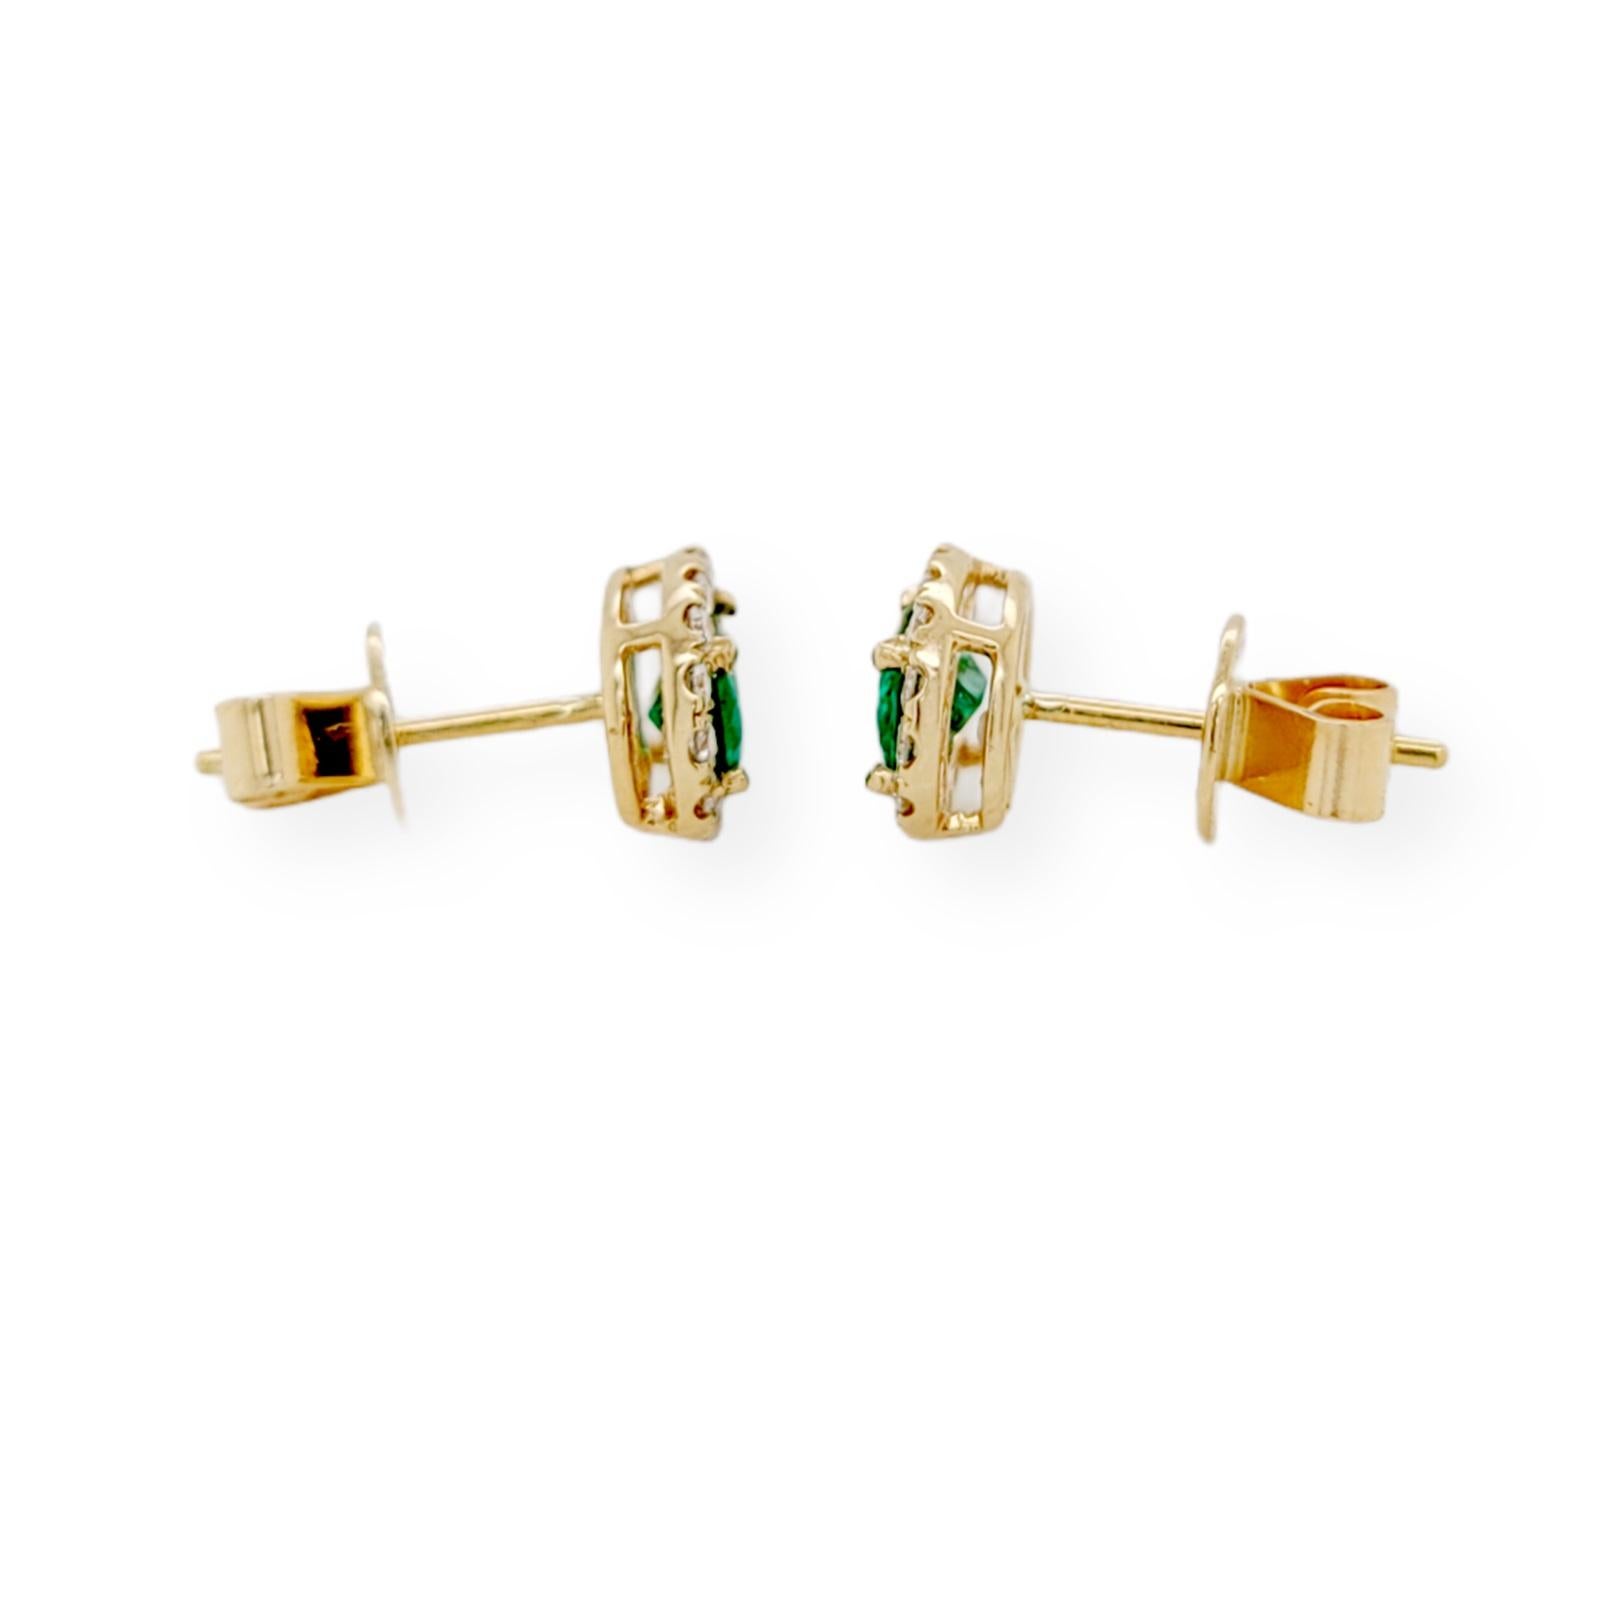 0.88 CT Colombian Emerald & 0.27 CT Diamonds in 14K Yellow Gold Stud Earrings In Excellent Condition For Sale In Los Angeles, CA